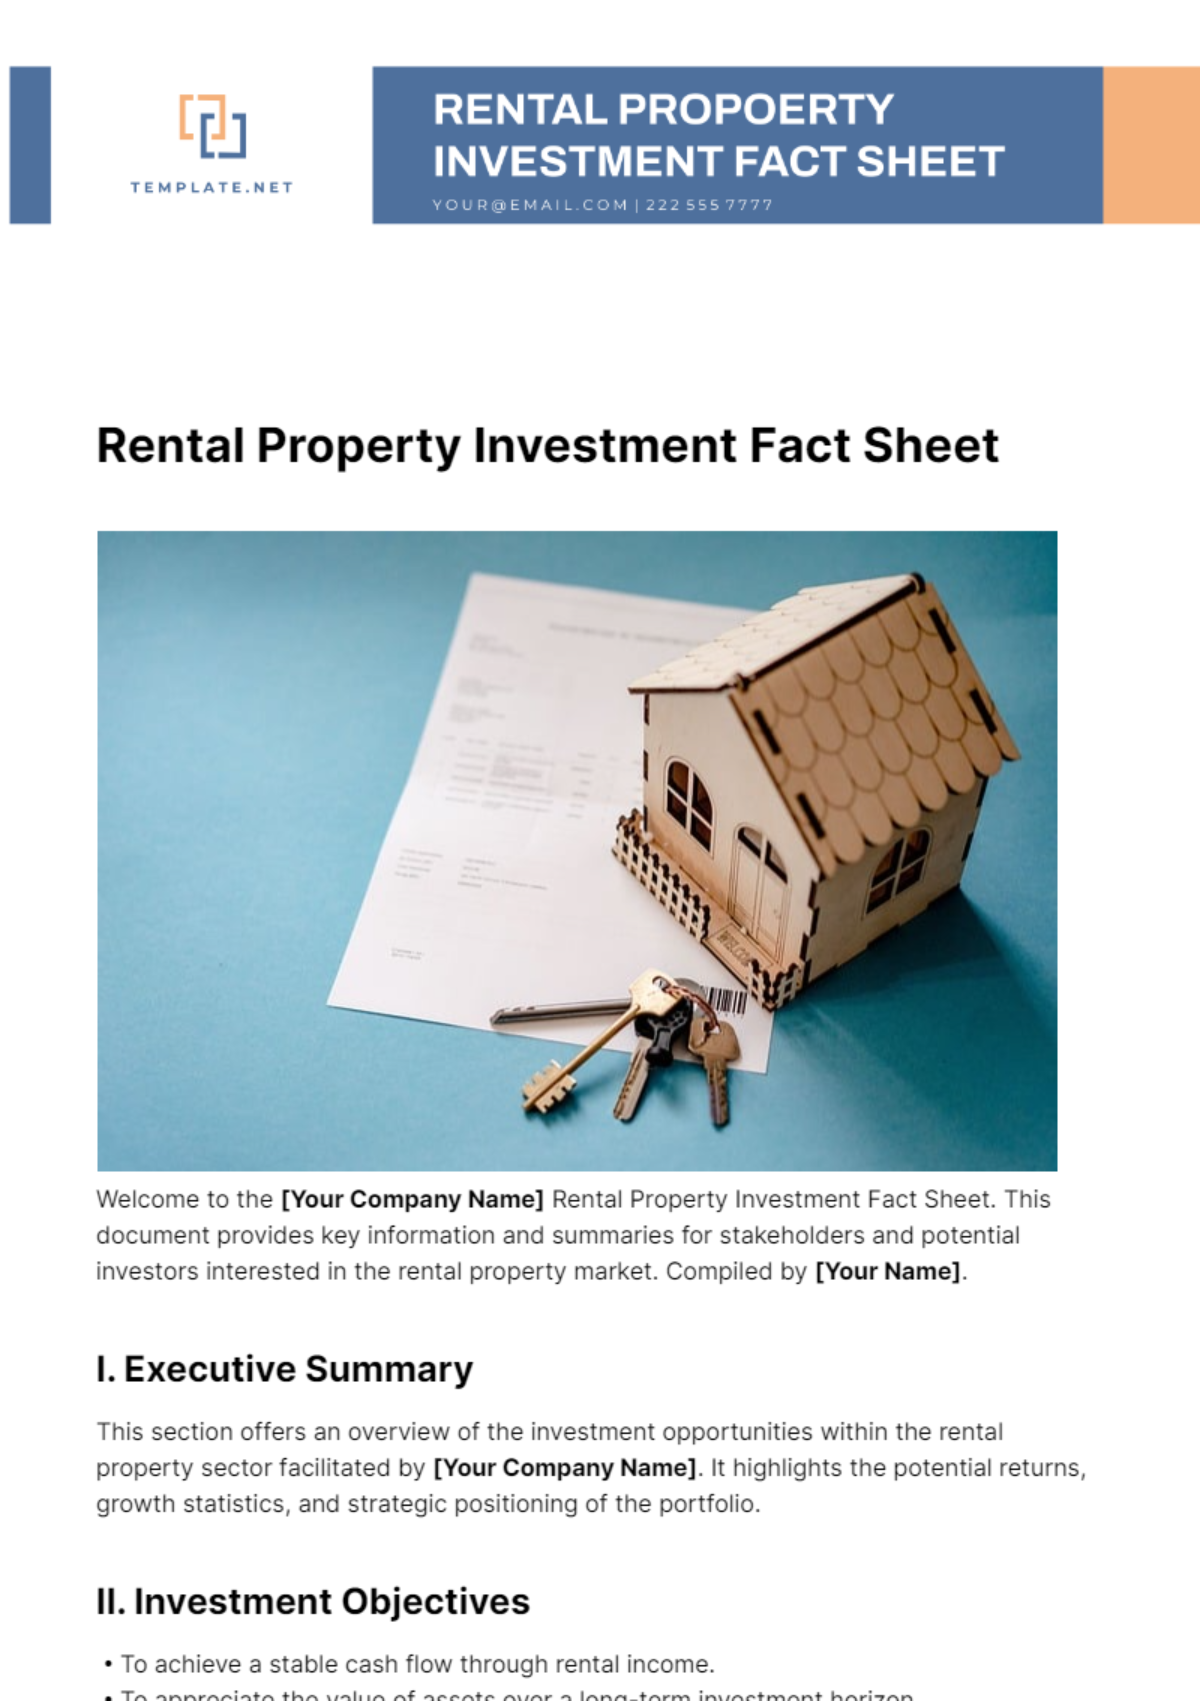 Rental Property Investment Fact Sheet Template